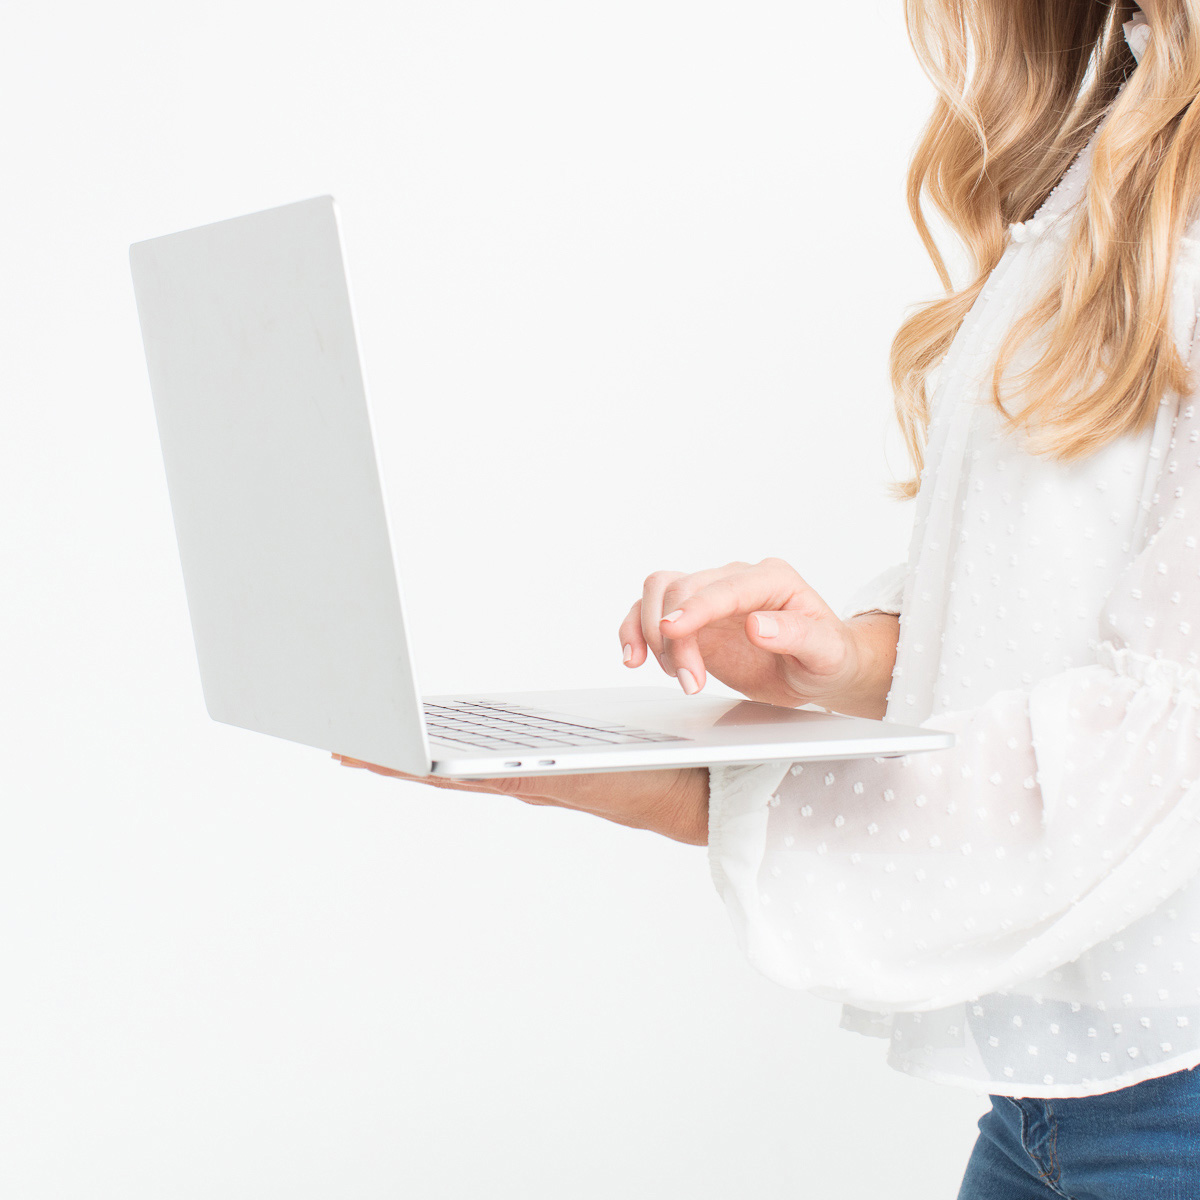 A female entrepreneur standing with her laptop while working on setting up her automated digital sales funnel